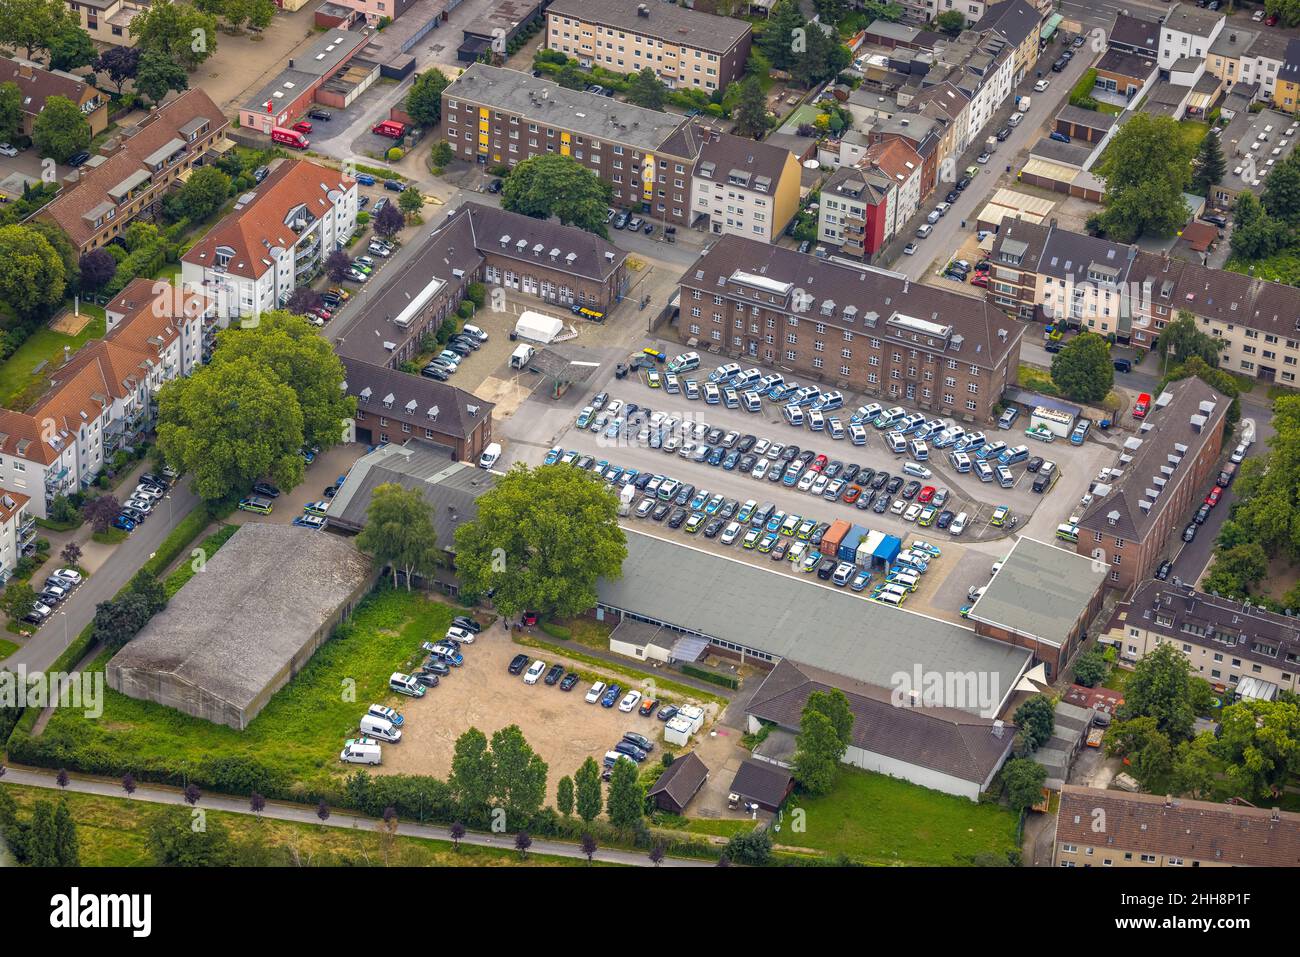 Aerial view, police headquarters, Neudorf, Duisburg, Ruhr area, North Rhine-Westphalia, Germany, eye of the law, authority, DE, Europe, aerial view, a Stock Photo